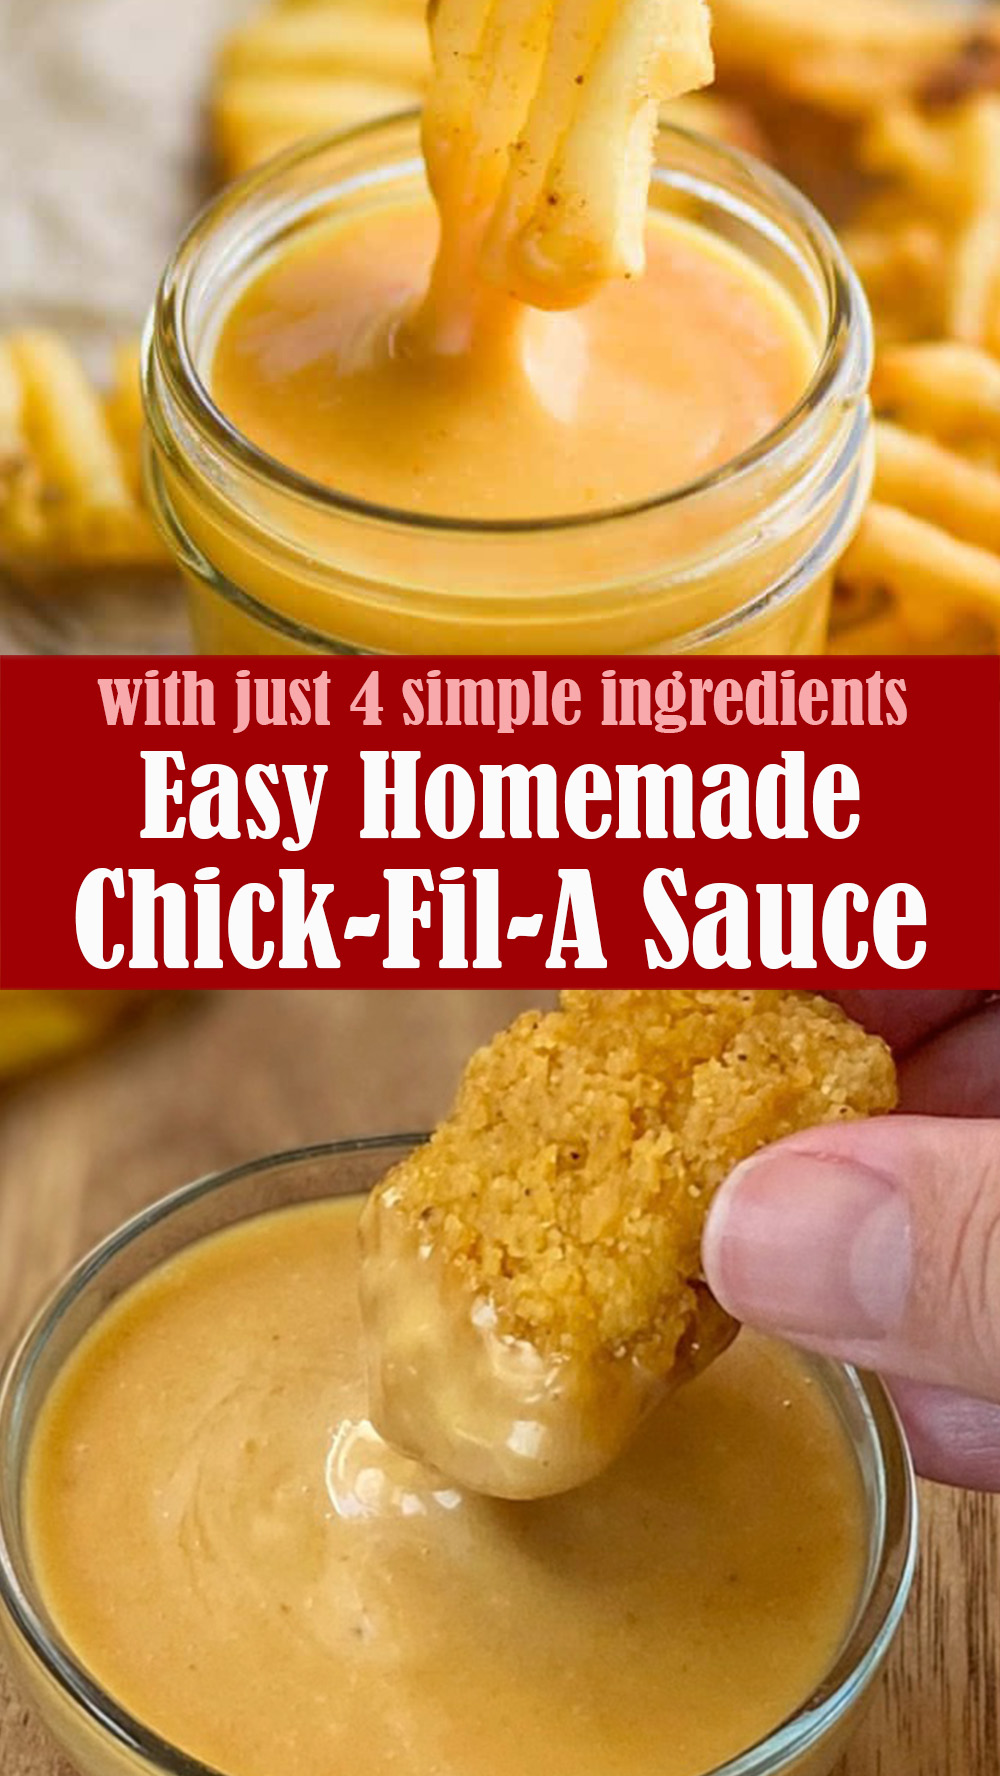 Easy Homemade Chick-Fil-A Sauce